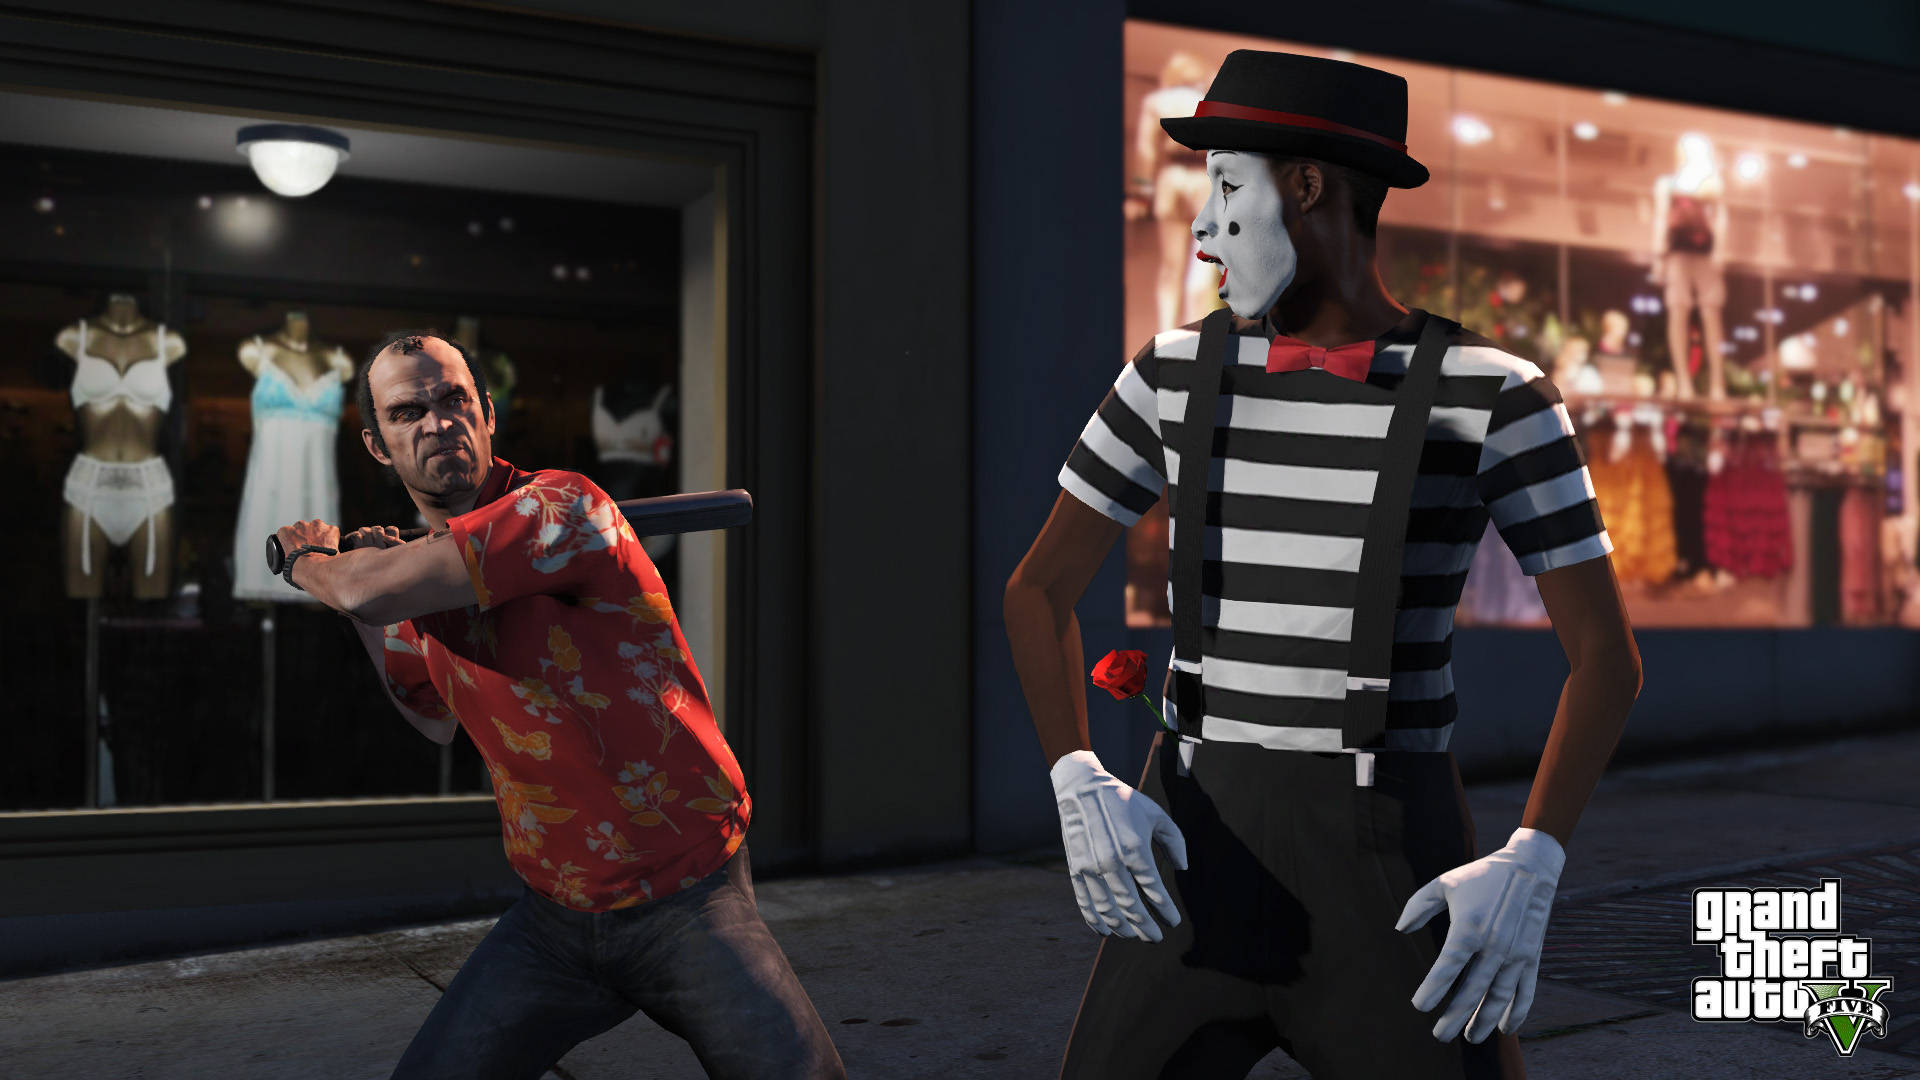 Cool Gta Shocked Mime Background